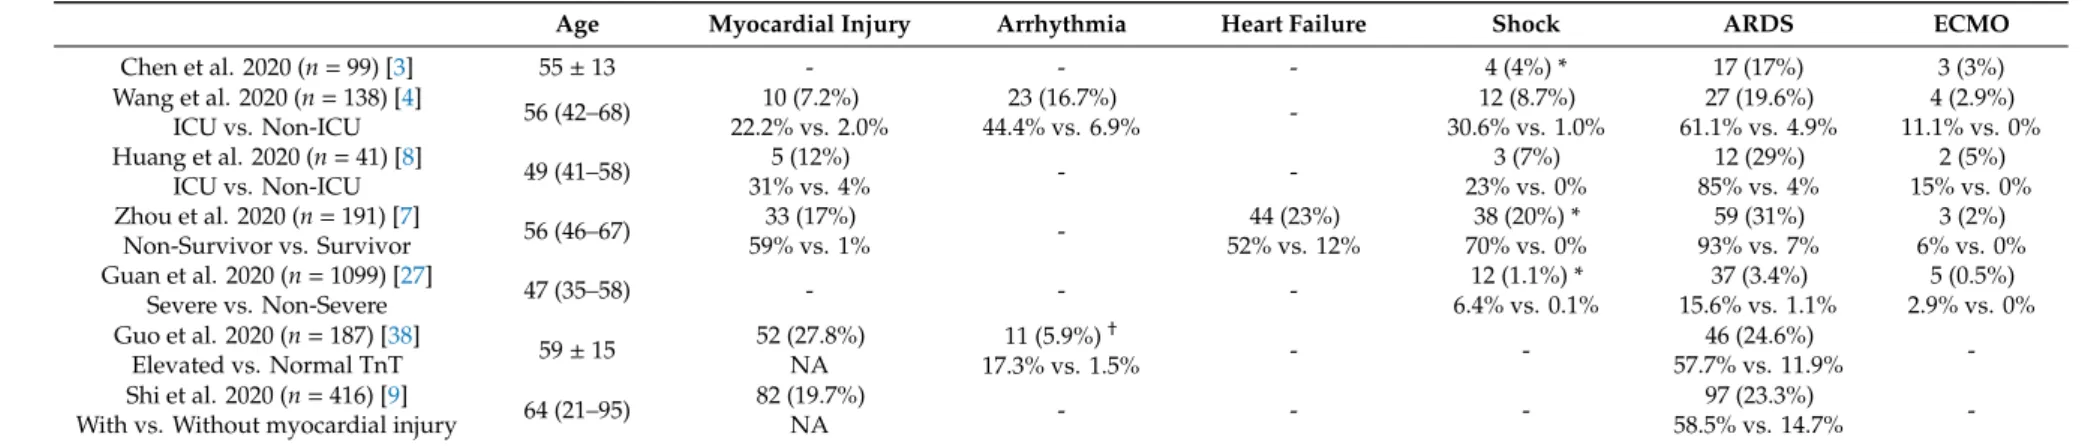 Table 2. Prevalence of Cardiovascular Complications, Acute Respiratory Distress Syndrome (ARDS), and Extracorporeal Membrane Oxygenation (ECMO) in COVID-19 Patients.